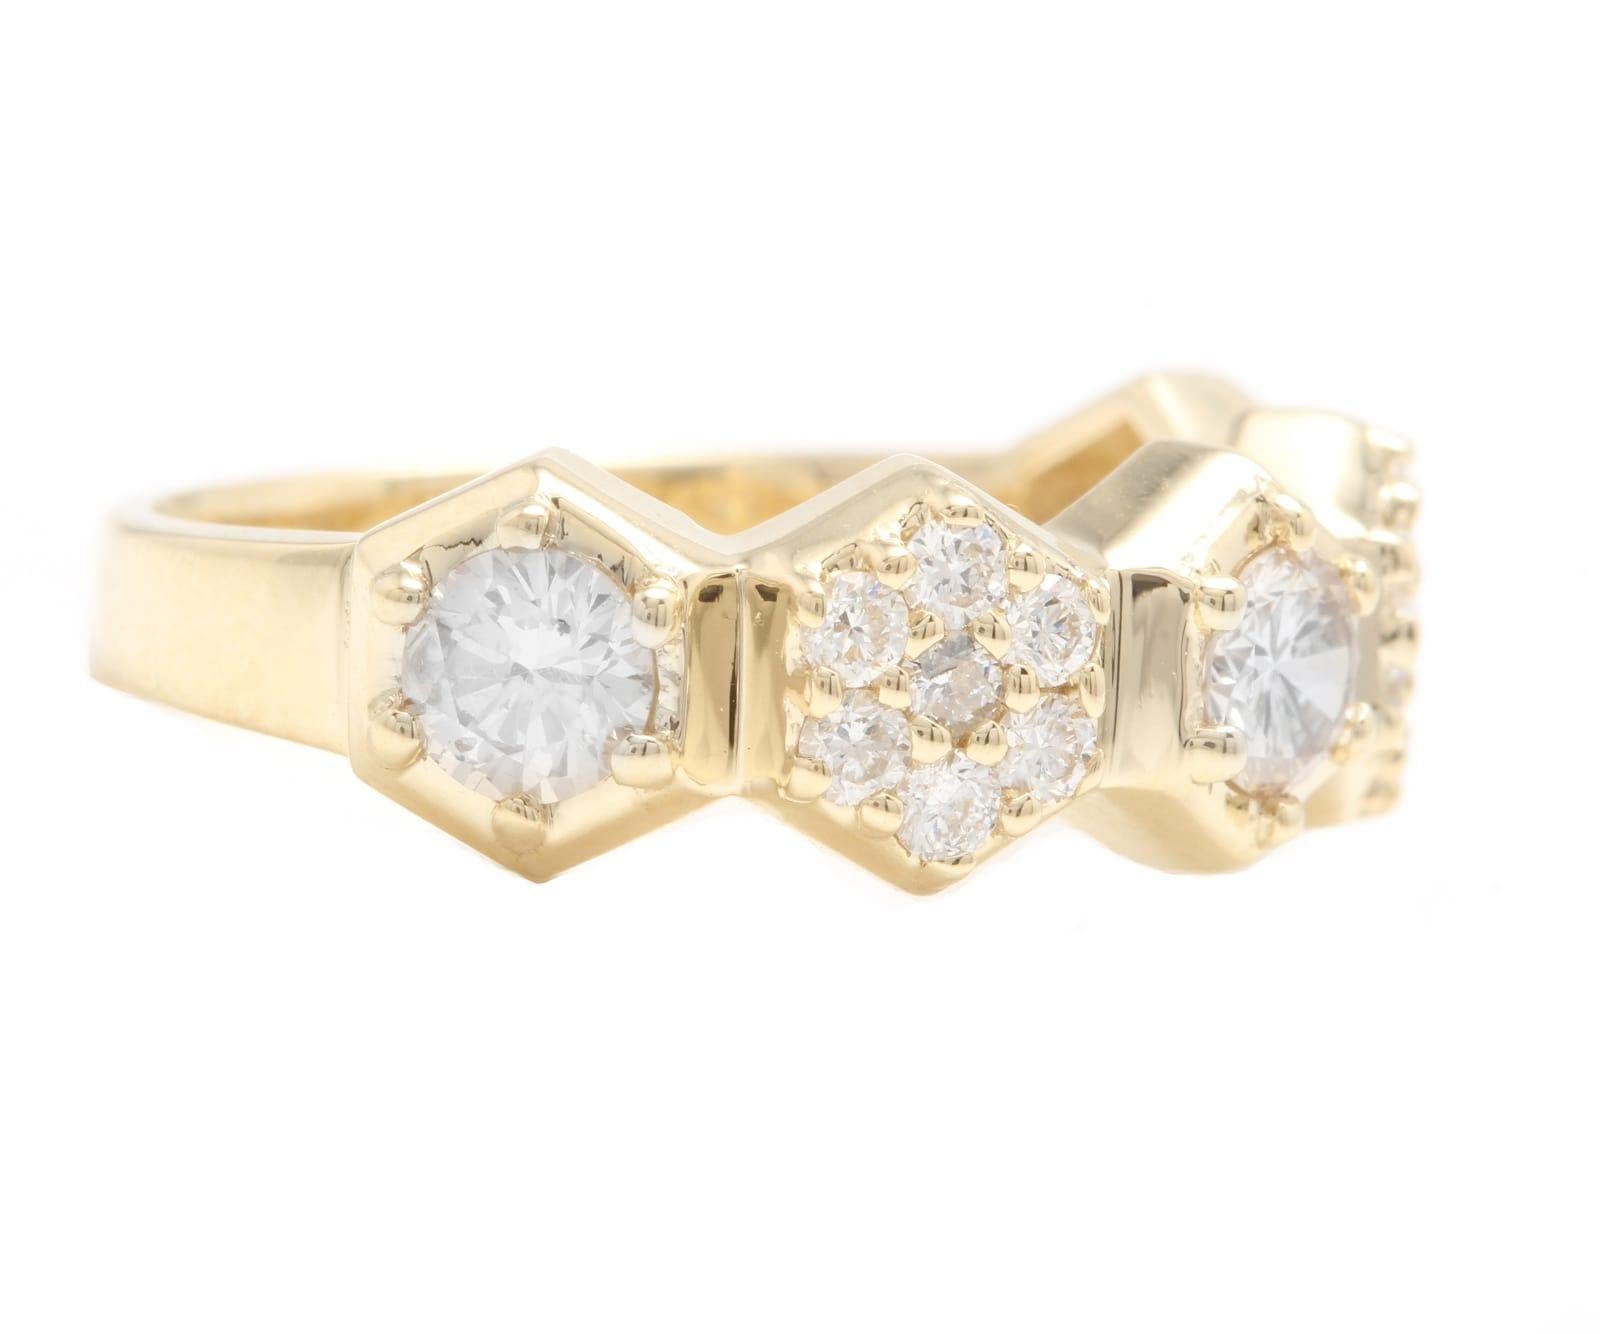 Superb 1.25 Carats Natural Diamond 14K Solid Yellow Gold Ring

Suggested Replacement Value: Approx. $4,500.00

Stamped: 14K

Total Natural Round Cut Diamonds Weight: Approx. 1.25 Carats (color G-I / Clarity SI1-SI2)

Bigger Diamonds Measure Approx.